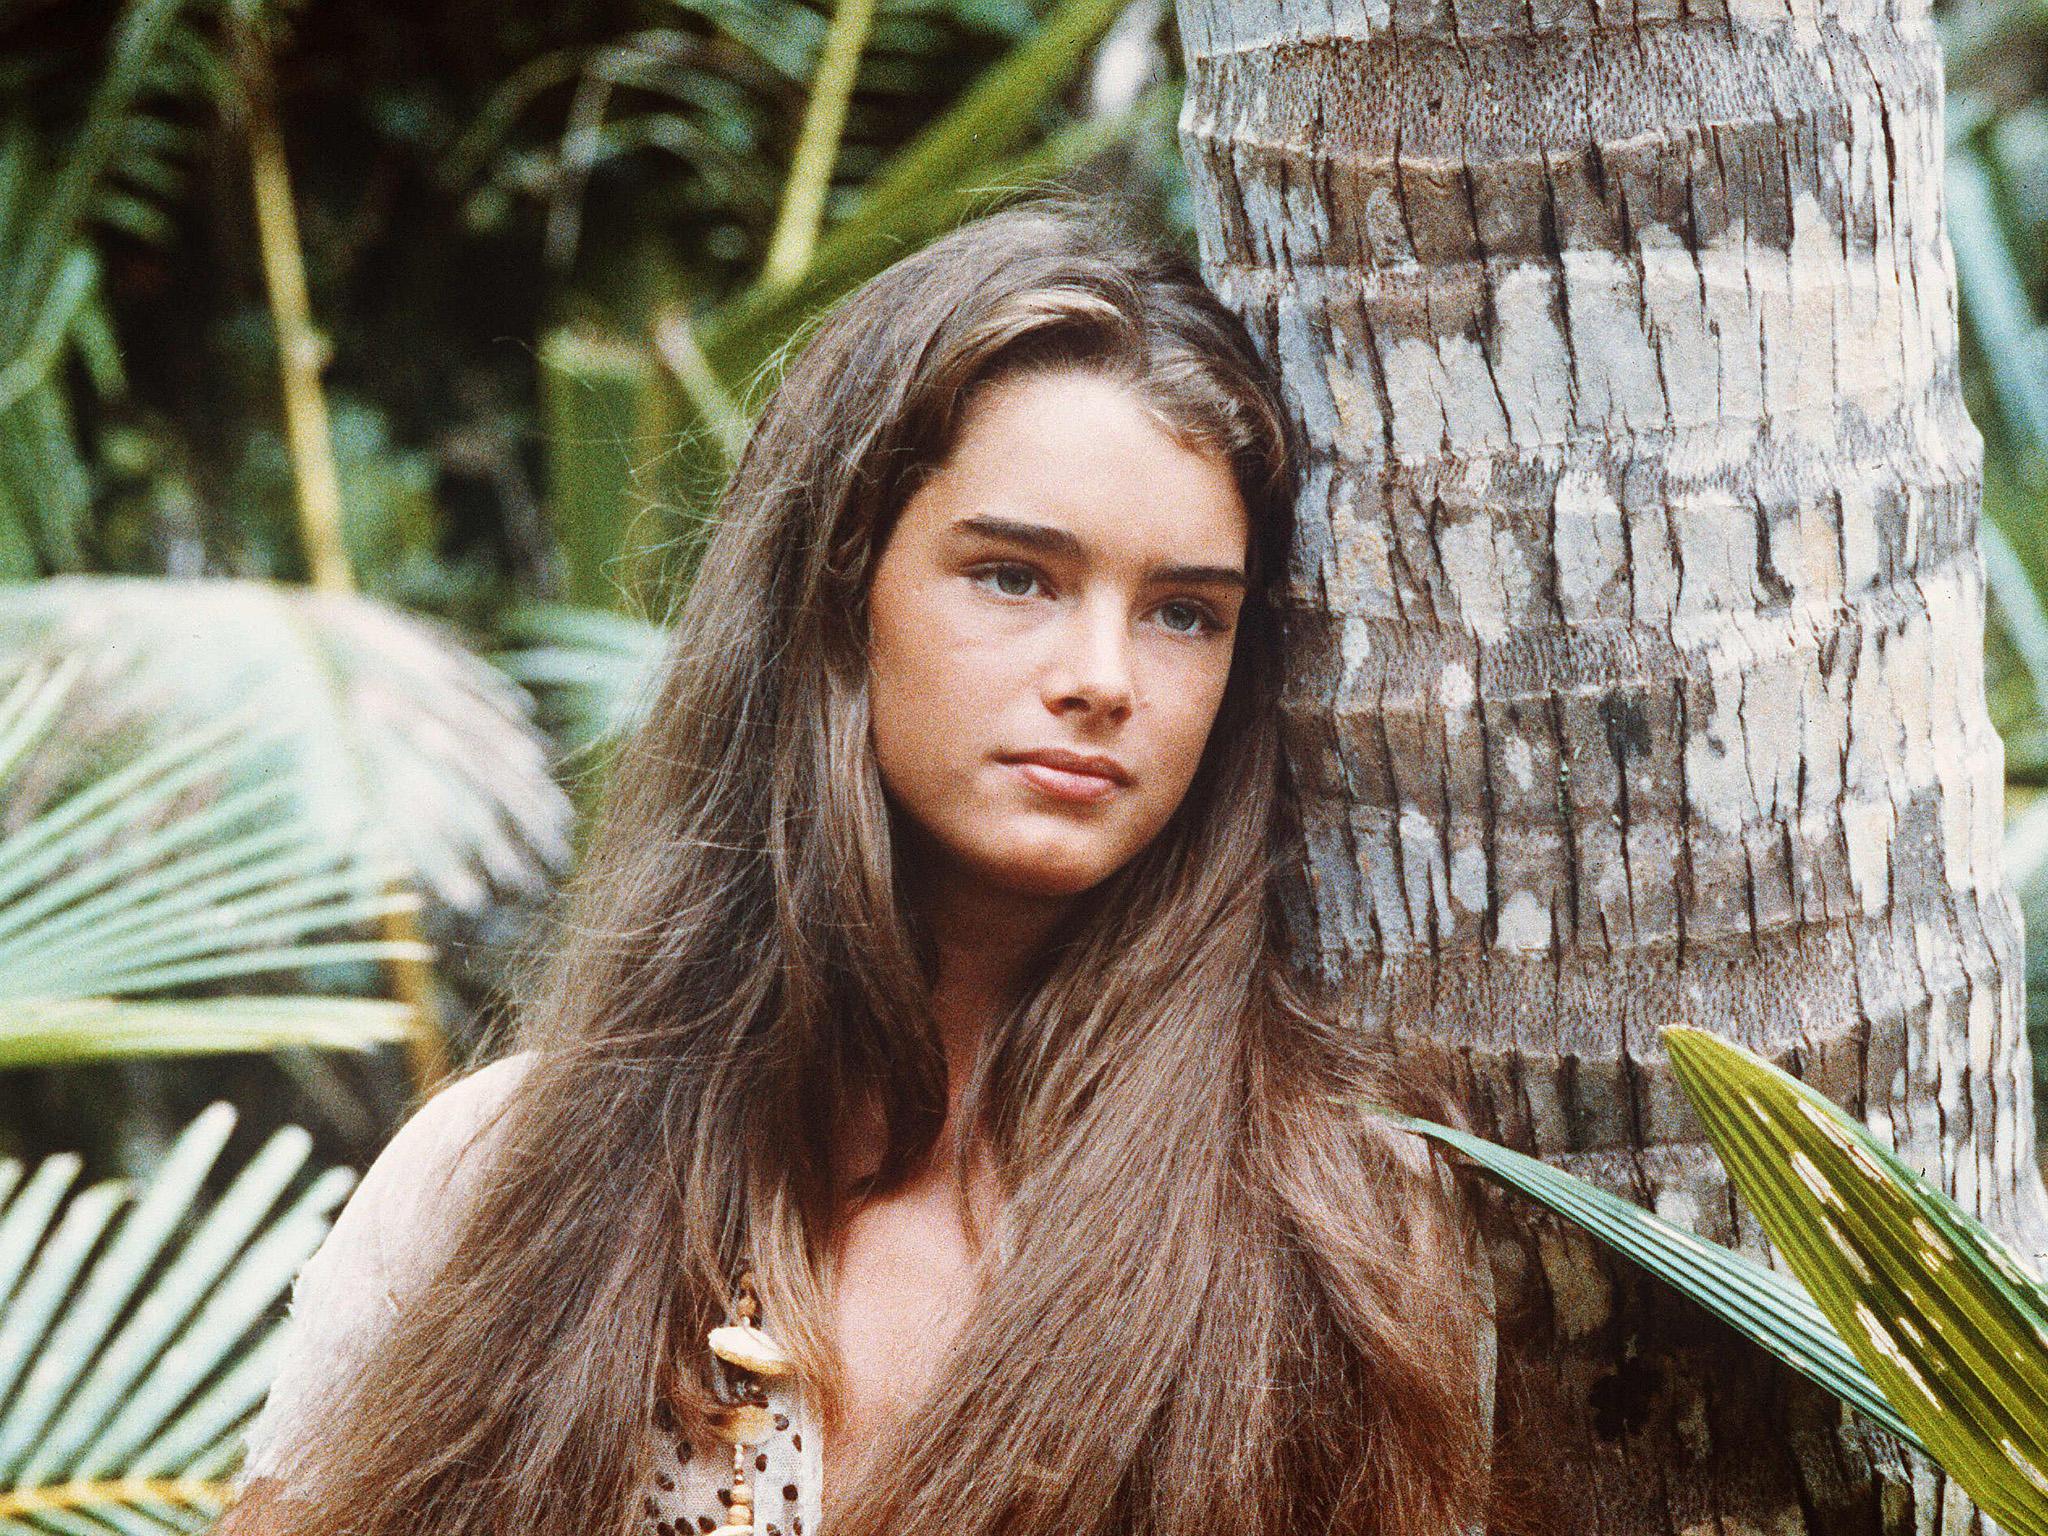 In 1980, the then 14-year-old starred in ‘The Blue Lagoon’, and was depicted as nude in many scenes